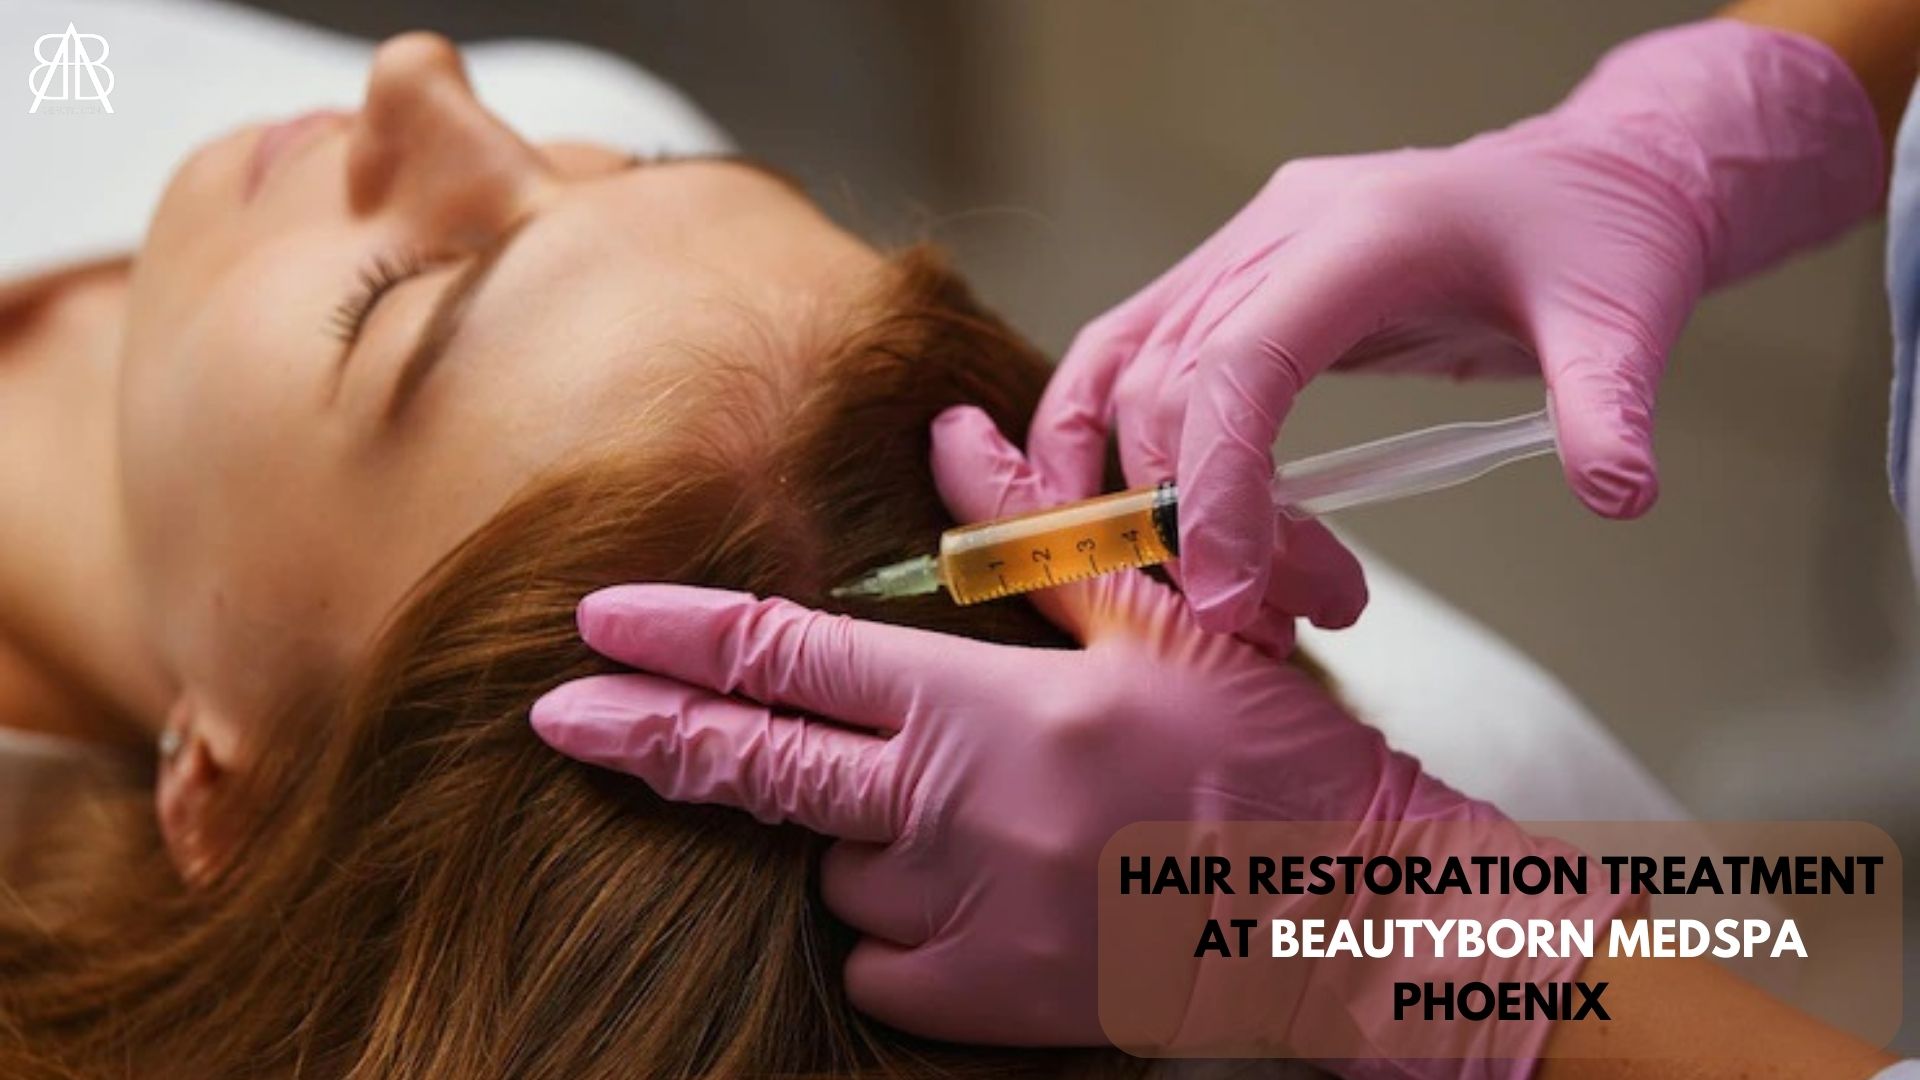 You are currently viewing HAIR RESTORATION TREATMENT AT BEAUTYBORN MEDSPA PHOENIX, ARIZONA, WHERE TIMELESS BEAUTY IS BORN!